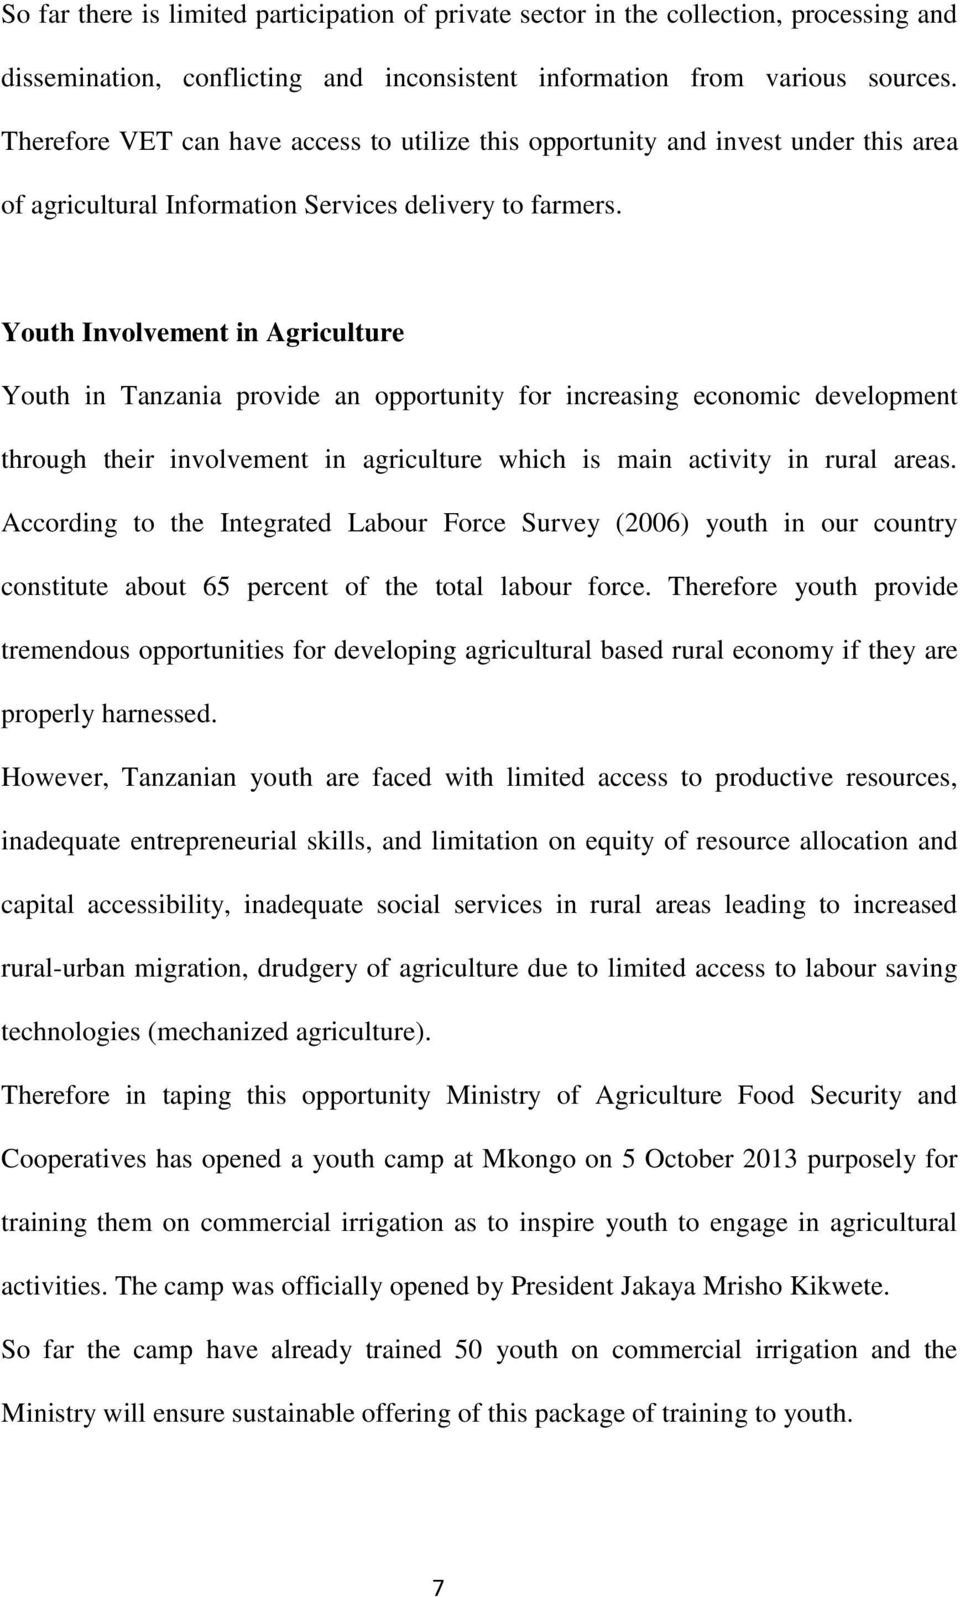 Youth Involvement in Agriculture Youth in Tanzania provide an opportunity for increasing economic development through their involvement in agriculture which is main activity in rural areas.